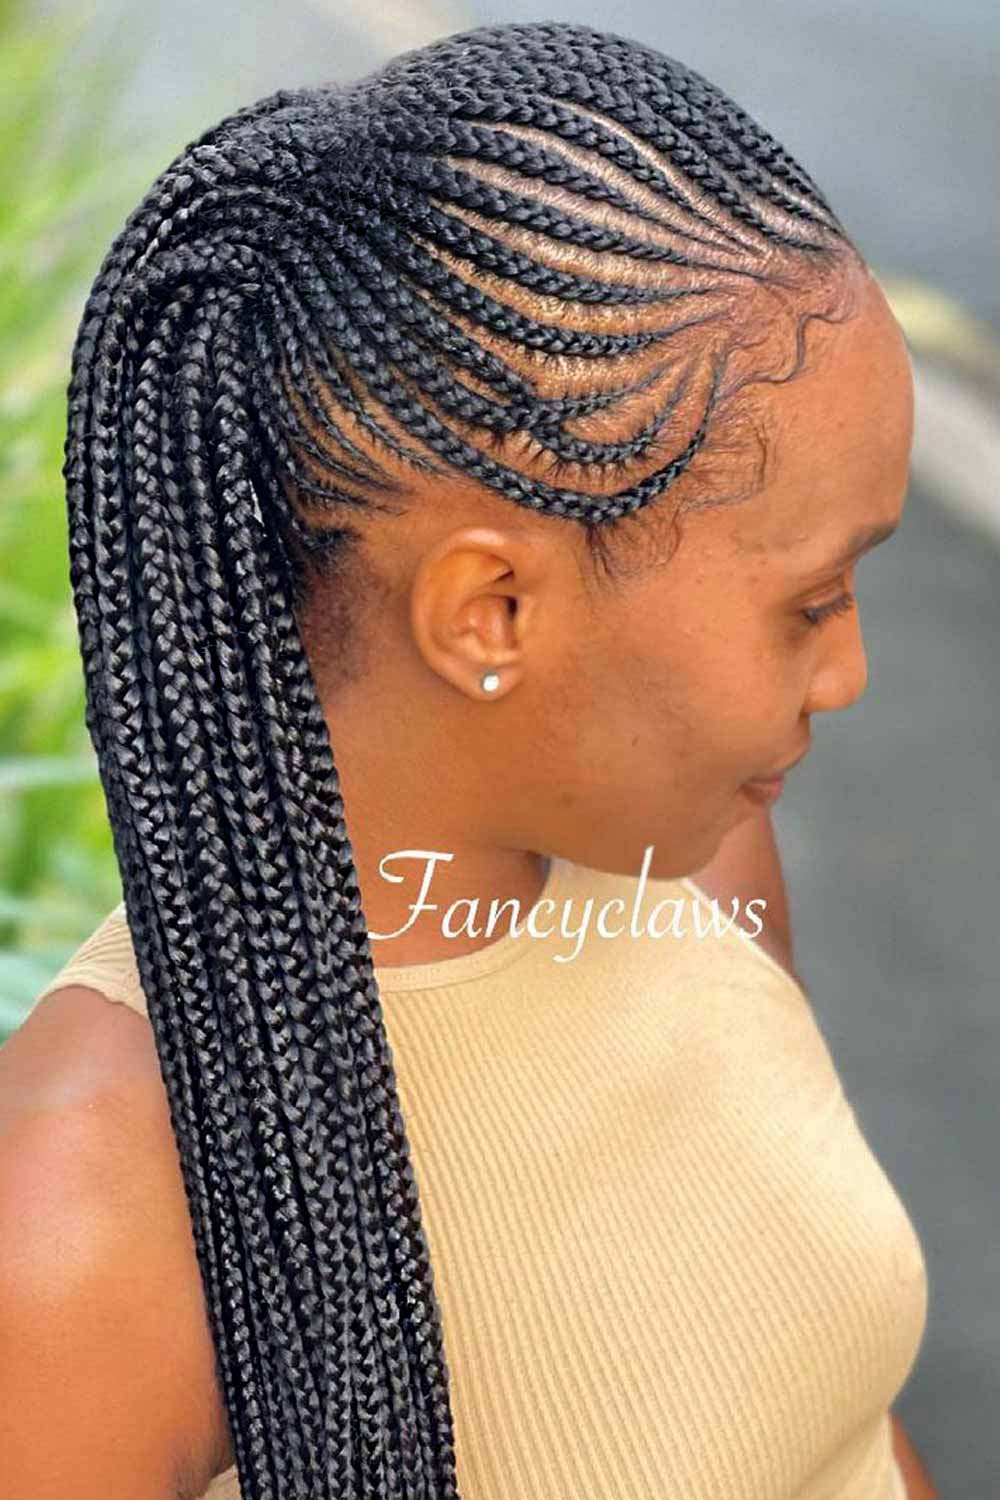 The tribal braid meaning is linked to the hierarchy, relationships and everyday tribal living in Ancient Africa.